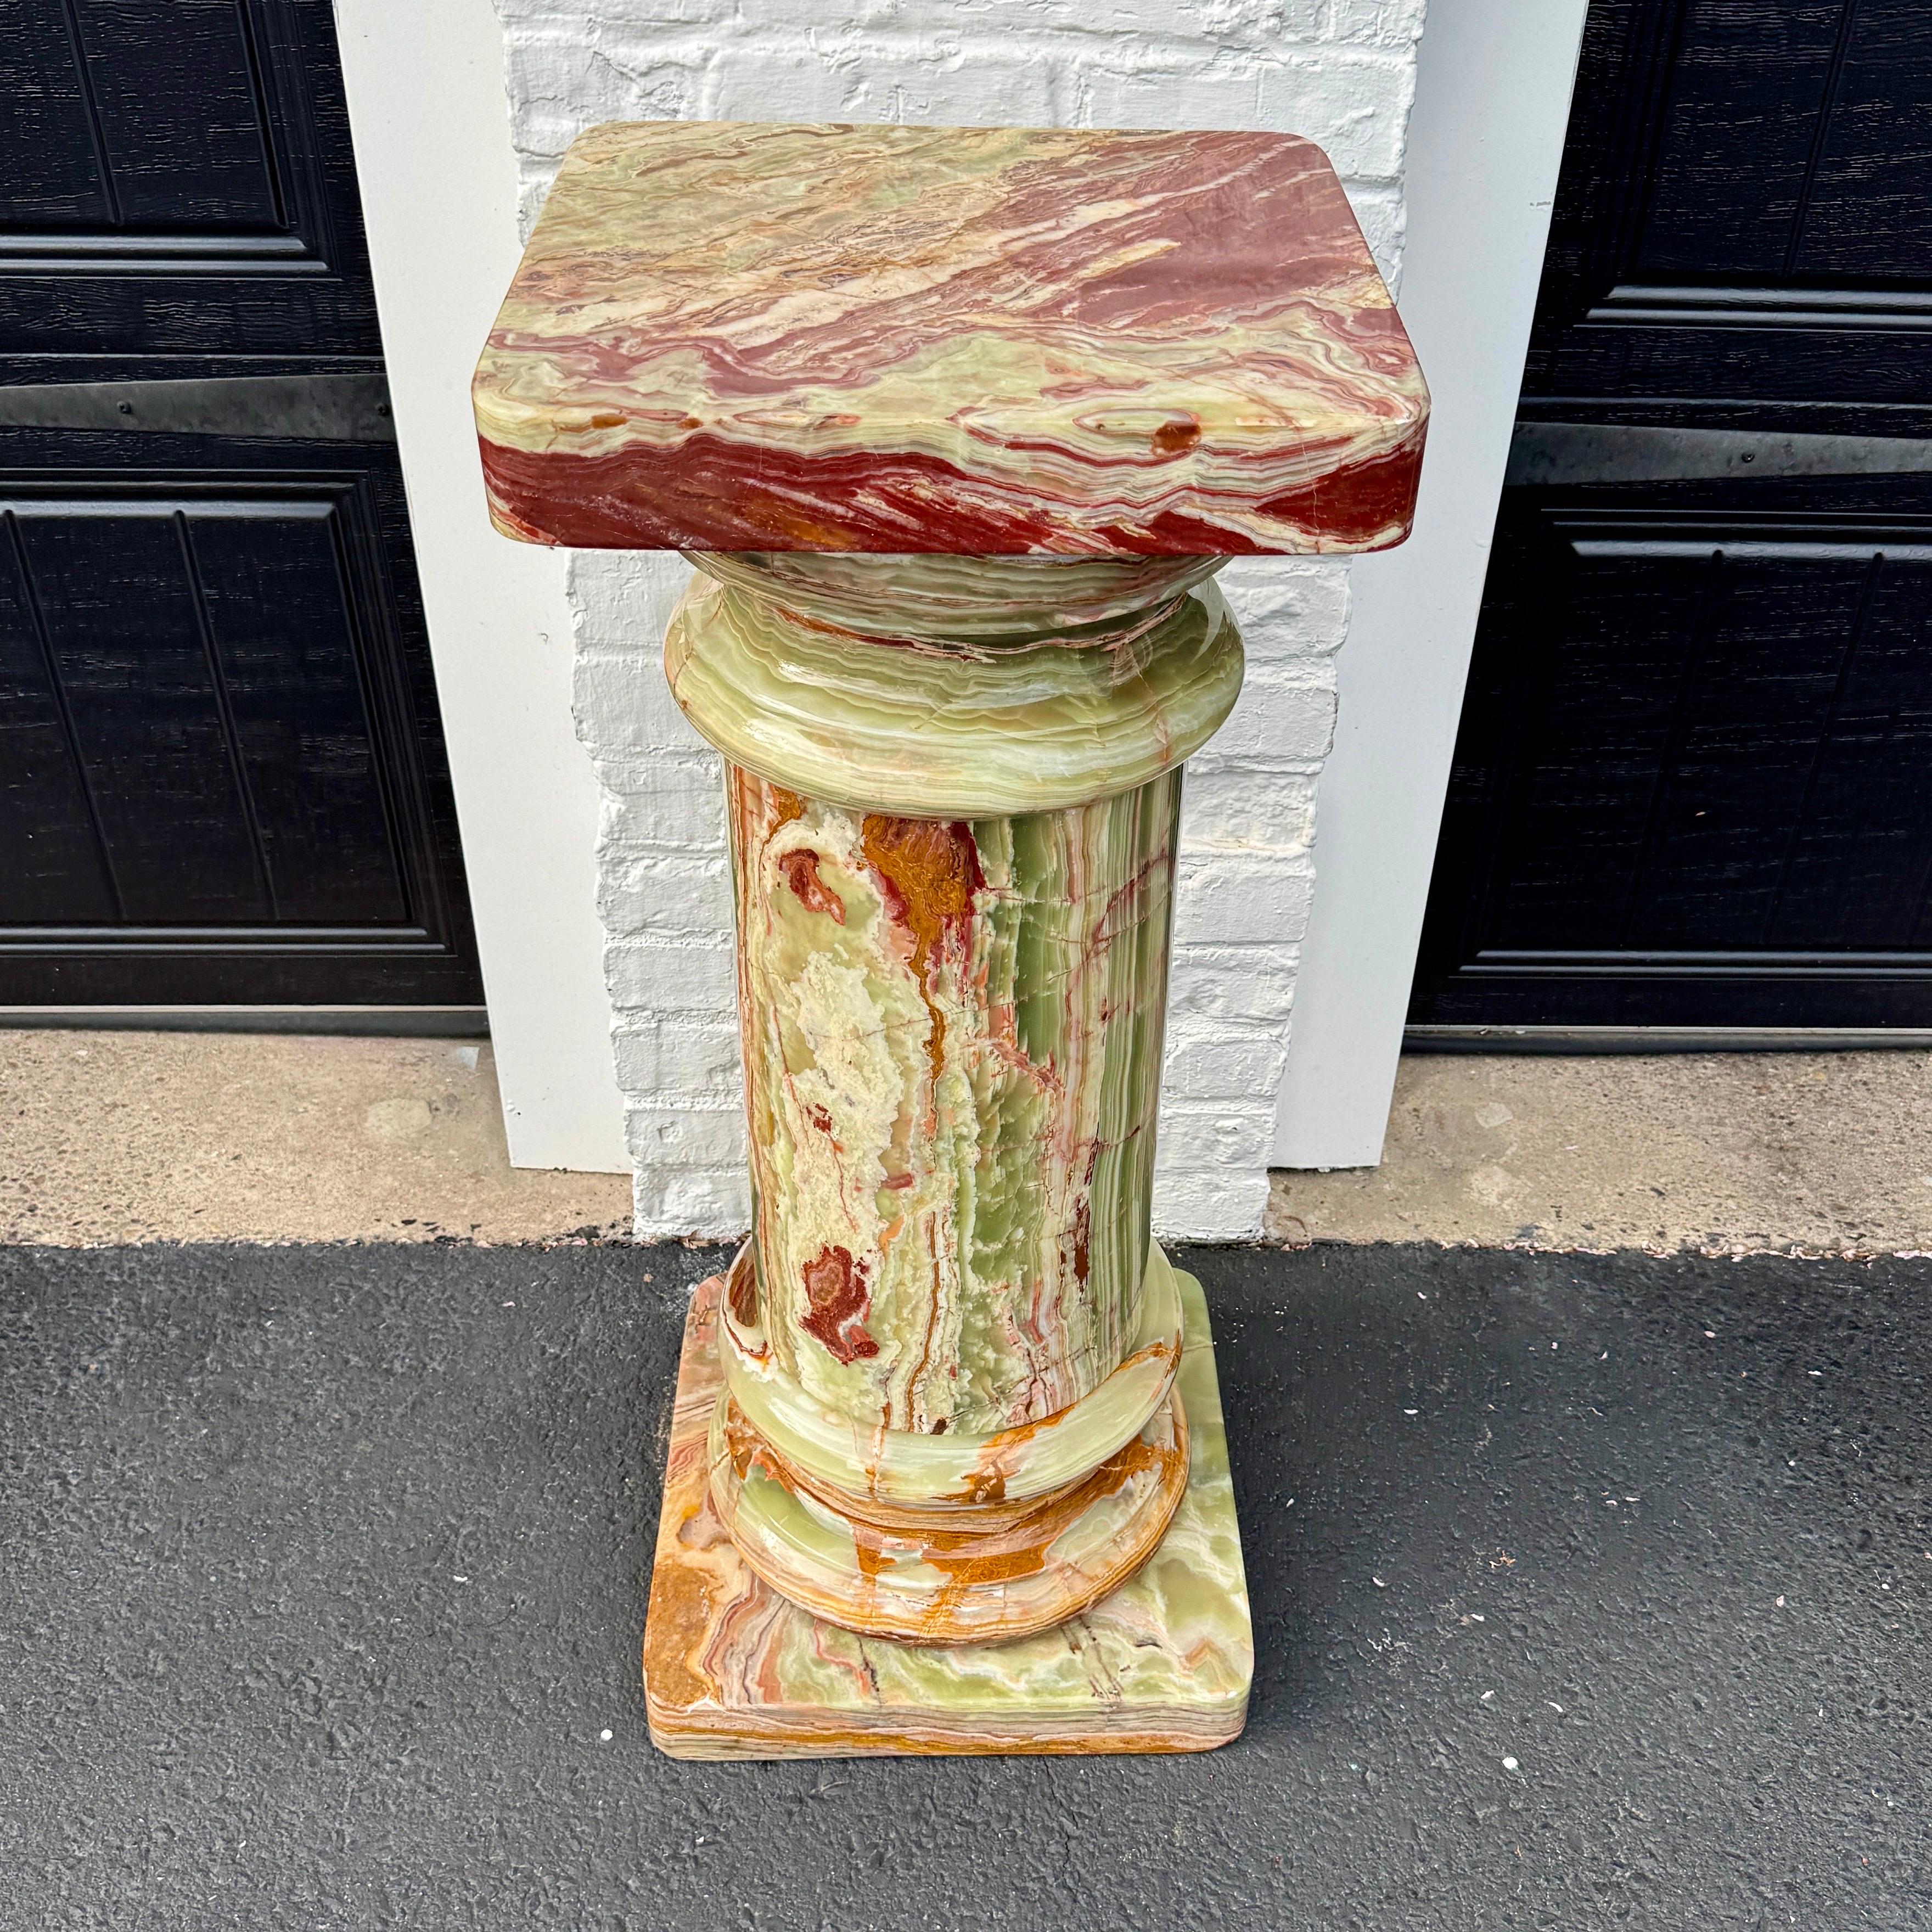 Large 20th Century Turned Onyx Pedestal Marble Column, Italy 1980's.
This amazing five piece pedestal has mostly a green, white and rust colored scheme. Perfect versatile piece to display your favorite sculpture or art piece. 
